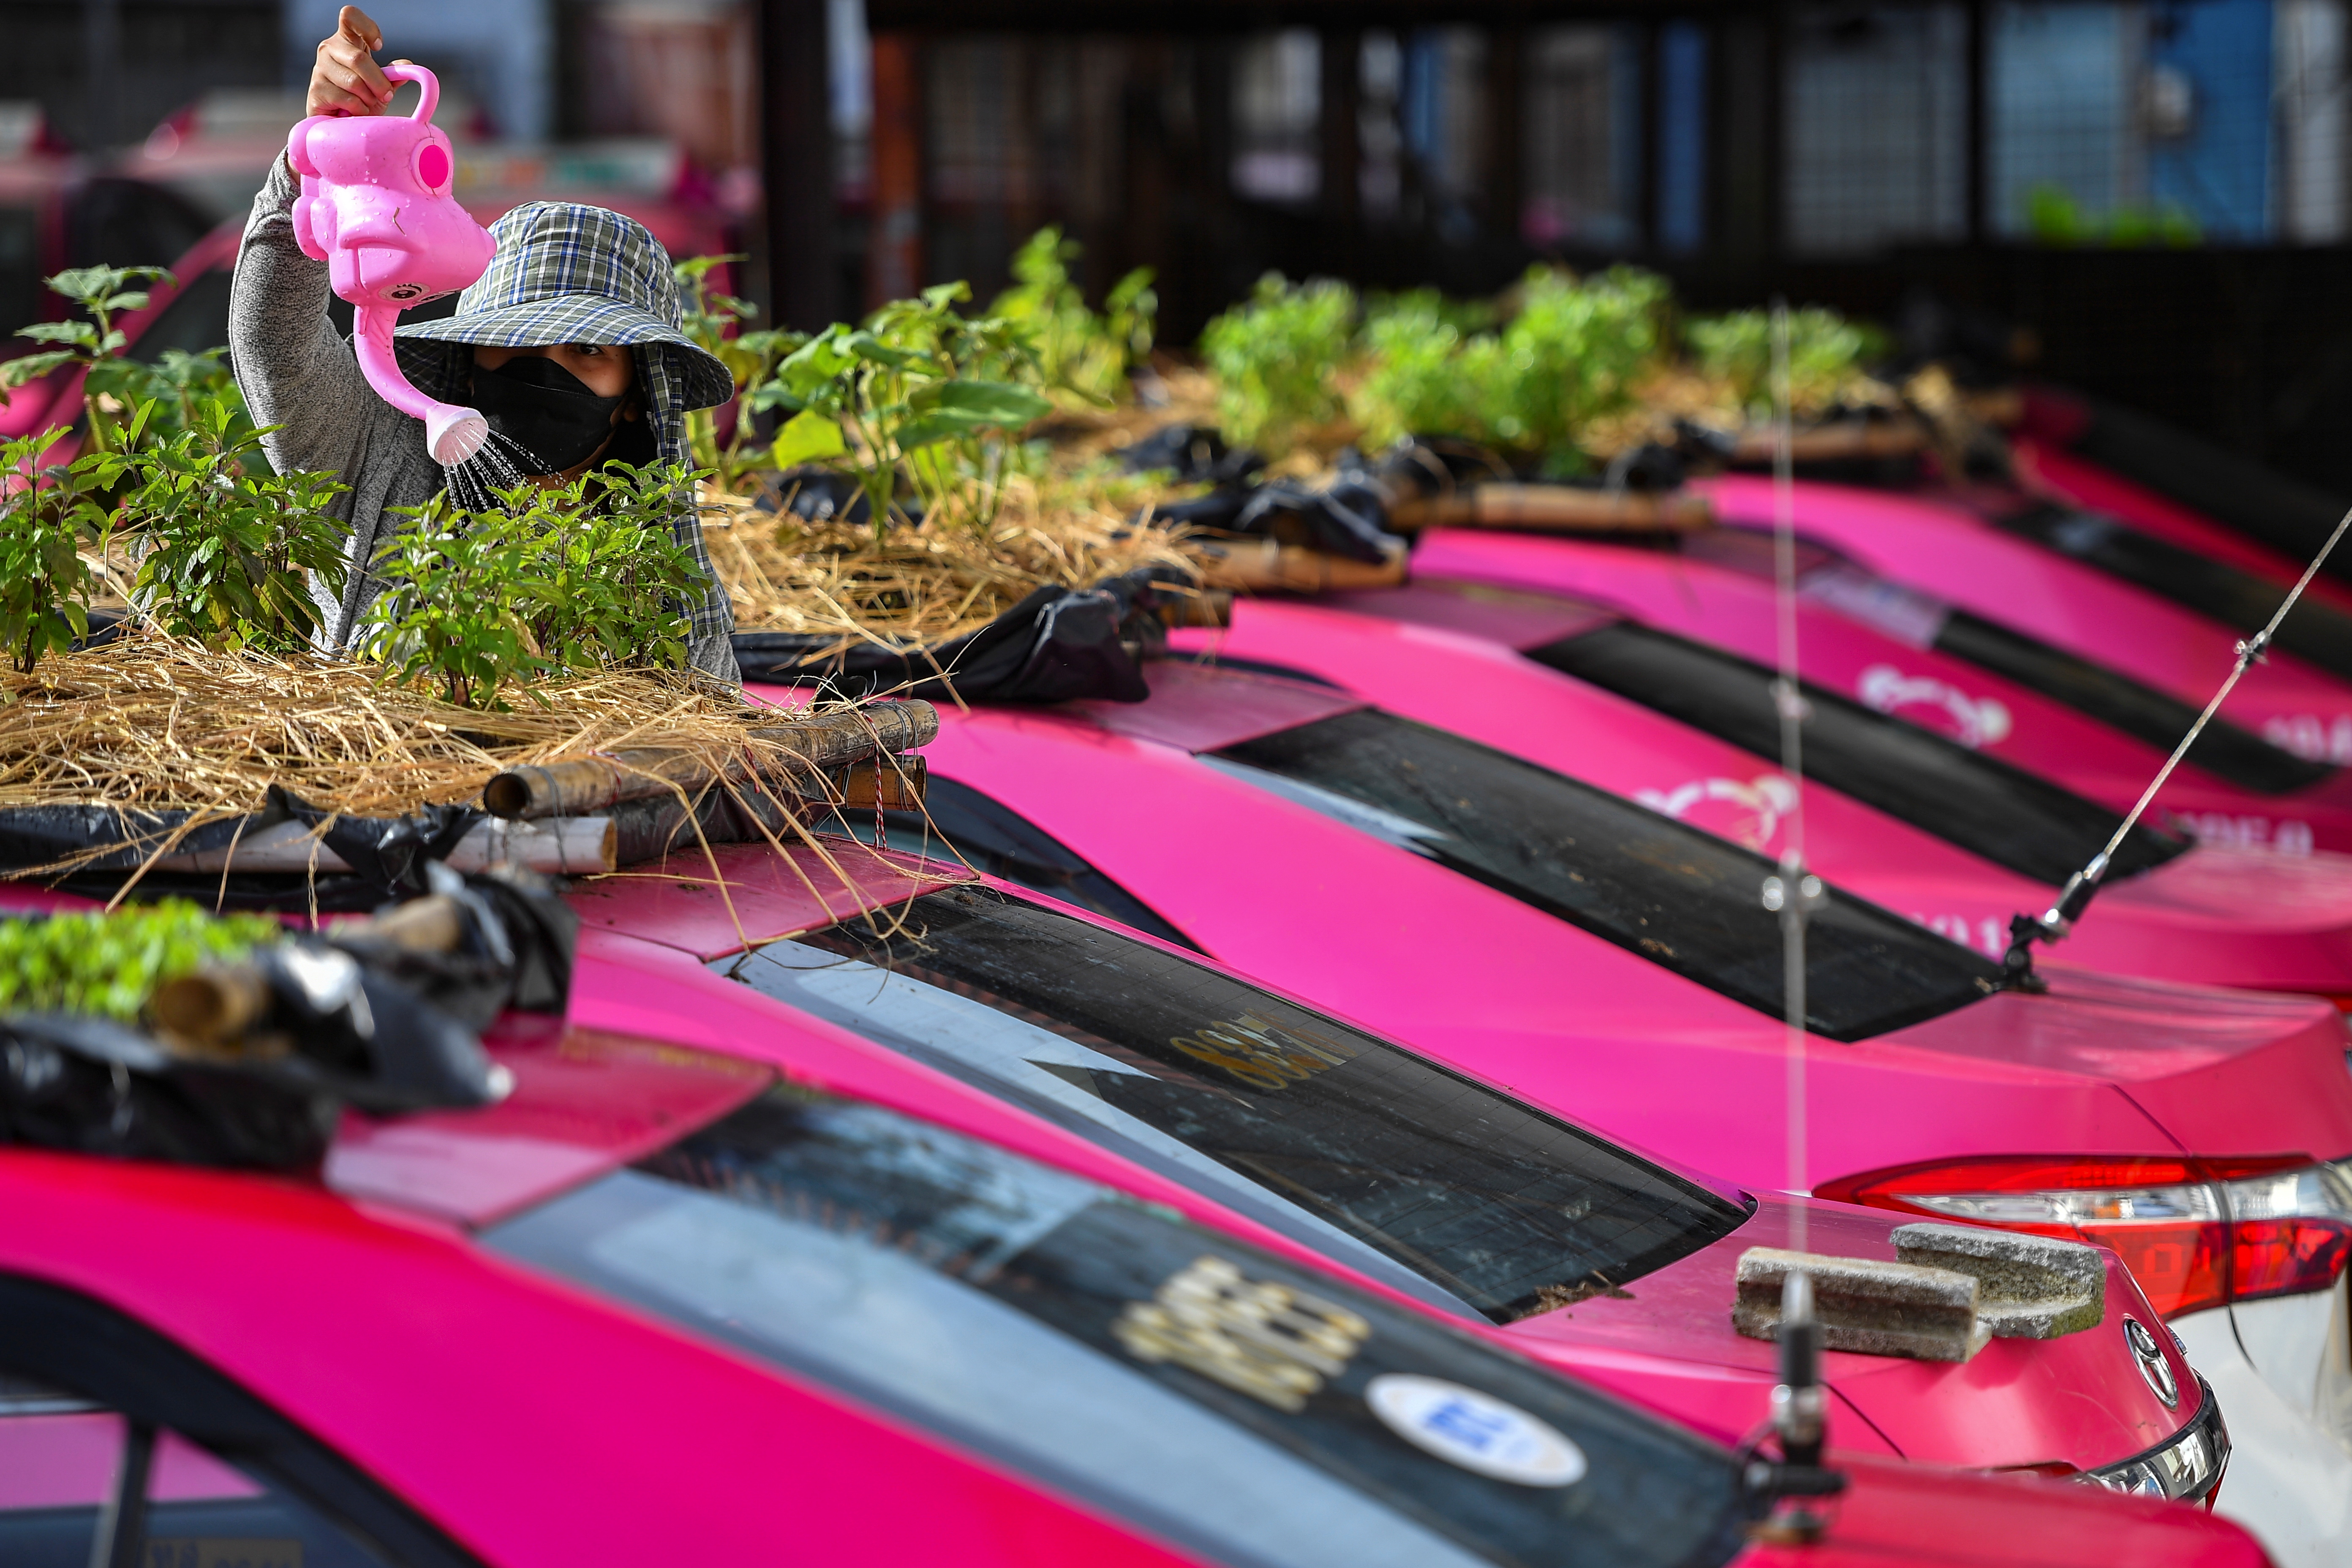 Taxi garages are converting unused taxi roofs into miniature gardens due to the COVID-19 crisis in Bangkok